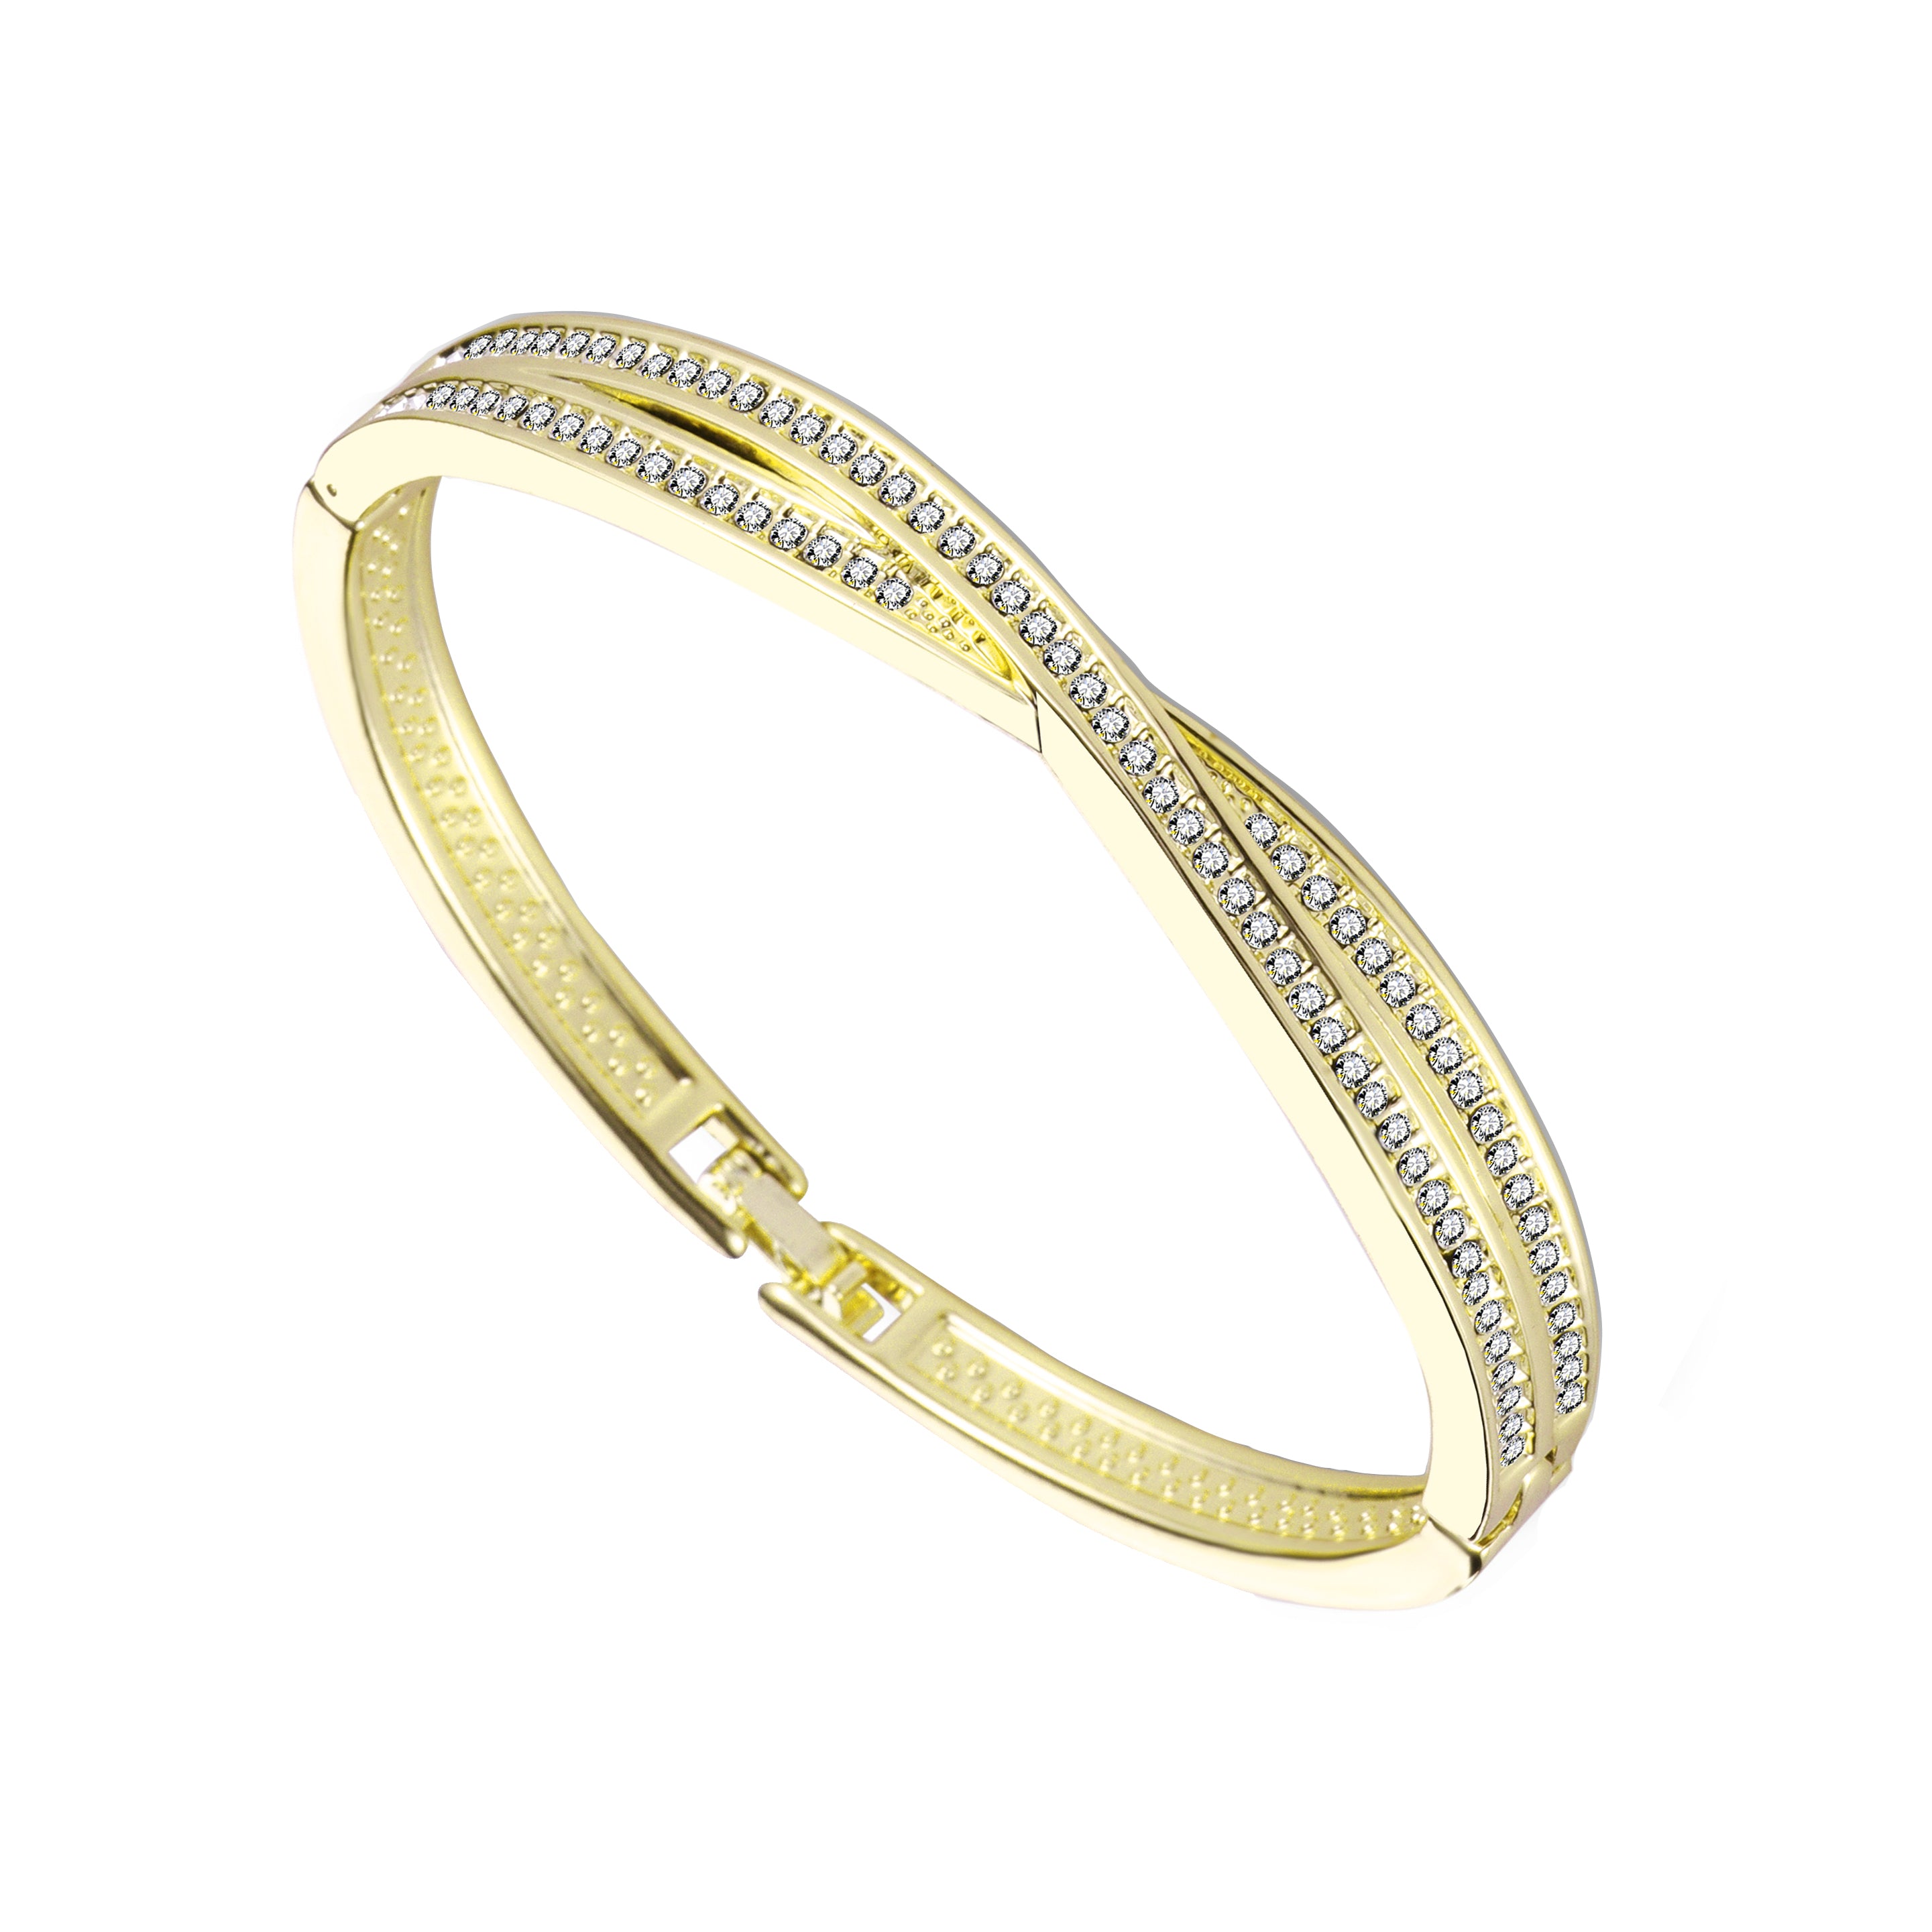 Gold Plated Crossover Bangle Created with Zircondia® Crystals by Philip Jones Jewellery